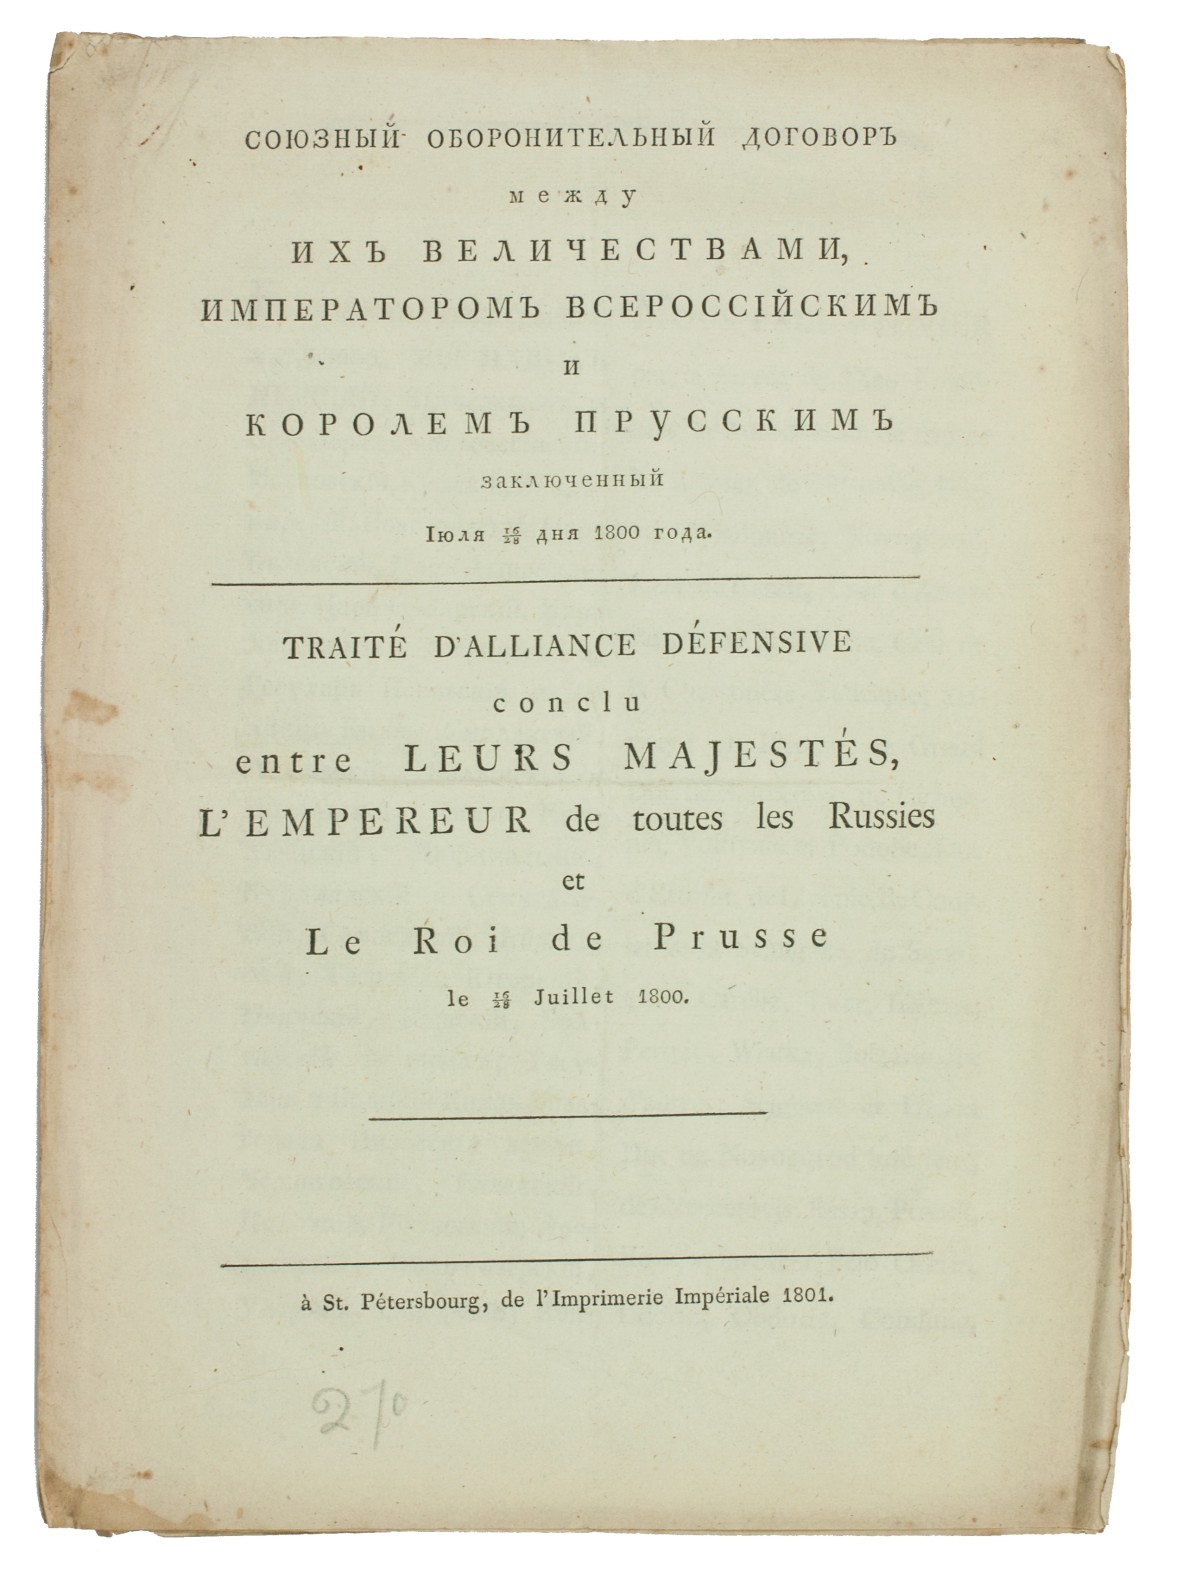 PAVEL (PAUL) I, Tsar. - [Title in Russian followed on the same page by:] Trait d'alliance dfensive conclu entre leurs majests, Empereur de toutes les Russies et le Roi de Prusse le 16/28 Juillet 1800.St Petersburg, Imperial Printing Office, 1801. Folio (29.5 x 21.5 cm). Treaty between Russia and Prussia in Russian and French in 2 parallel columns in cyrillic (left) and roman (right) types. Loose bifolia (and 1 singleton leaf).